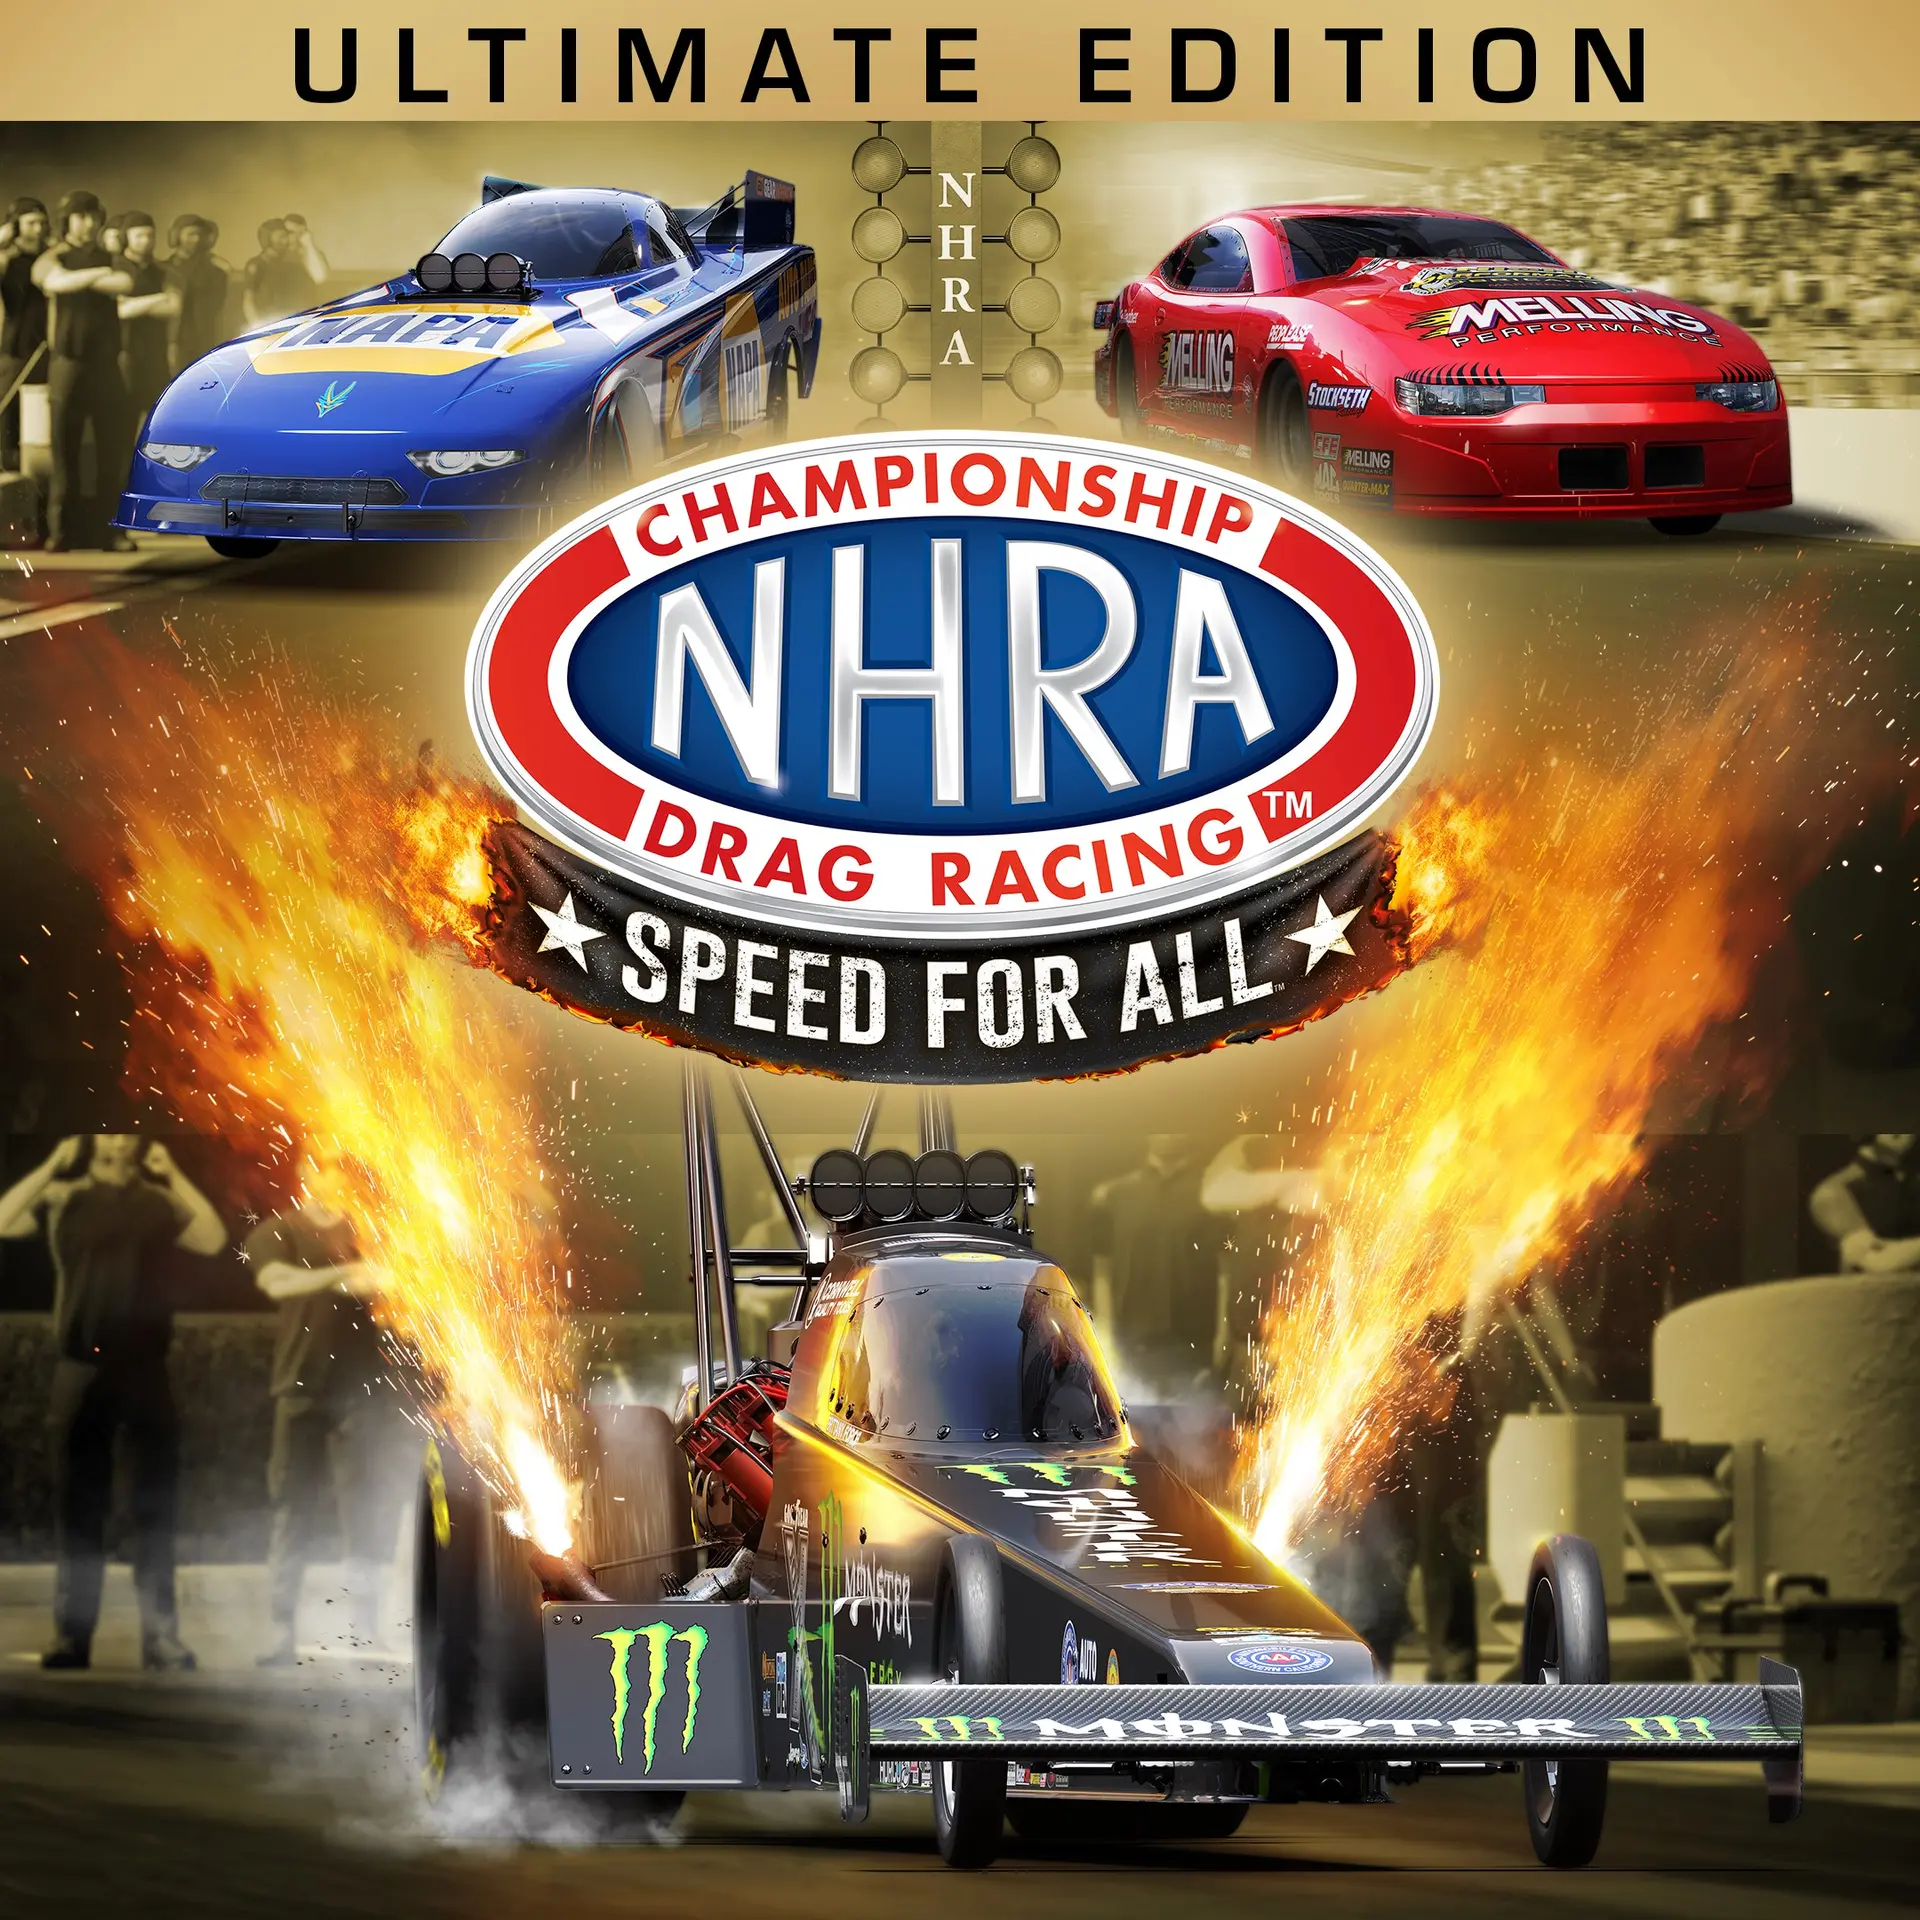 NHRA Championship Drag Racing: Speed for All - Ultimate Edition (Xbox Games BR)